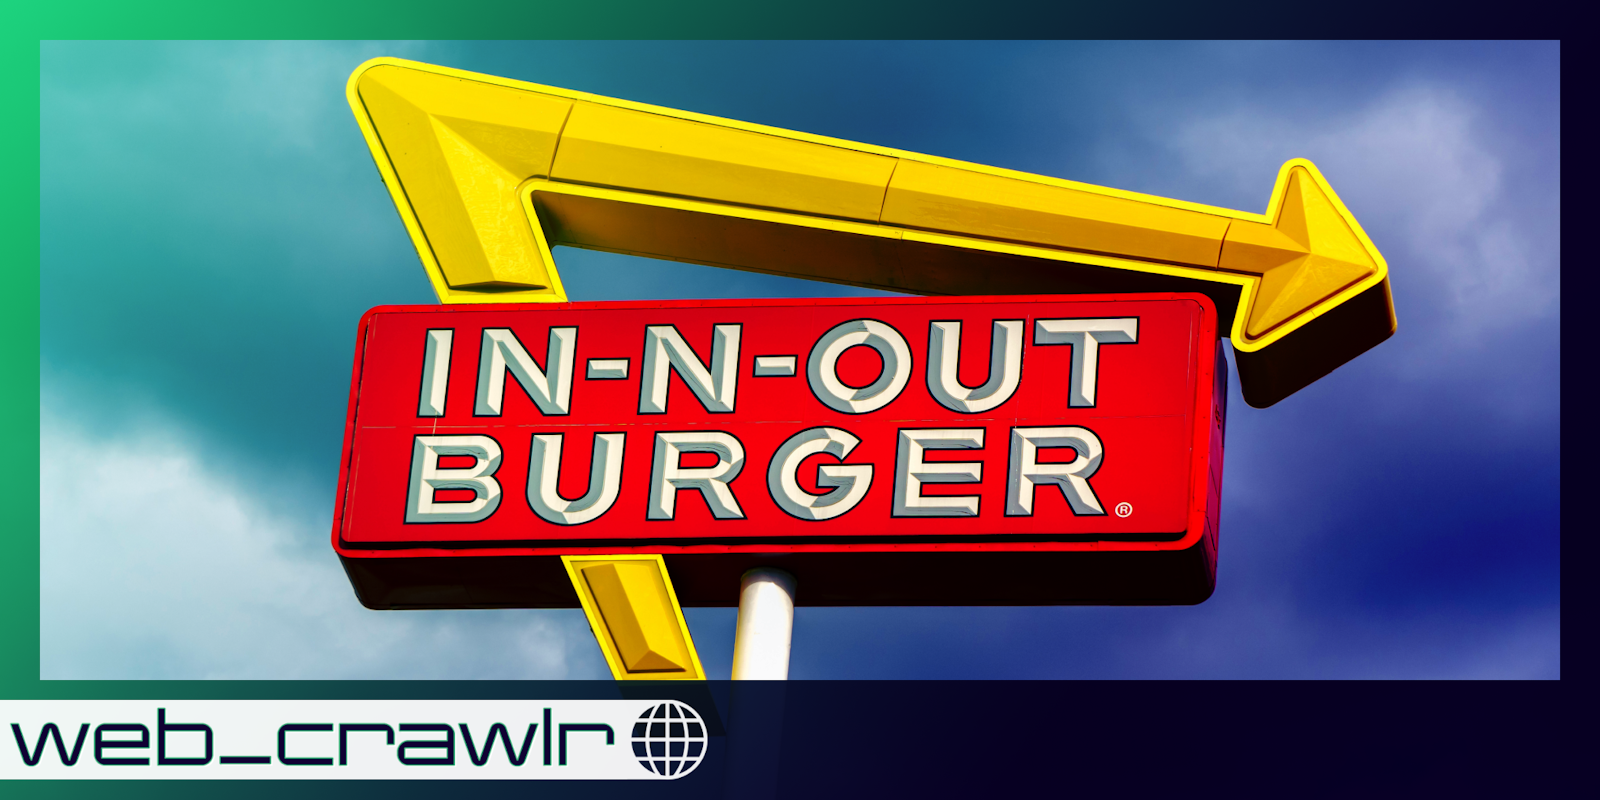 An In-N-Out Burger sign. The Daily Dot newsletter web_crawlr logo is in the bottom left corner.